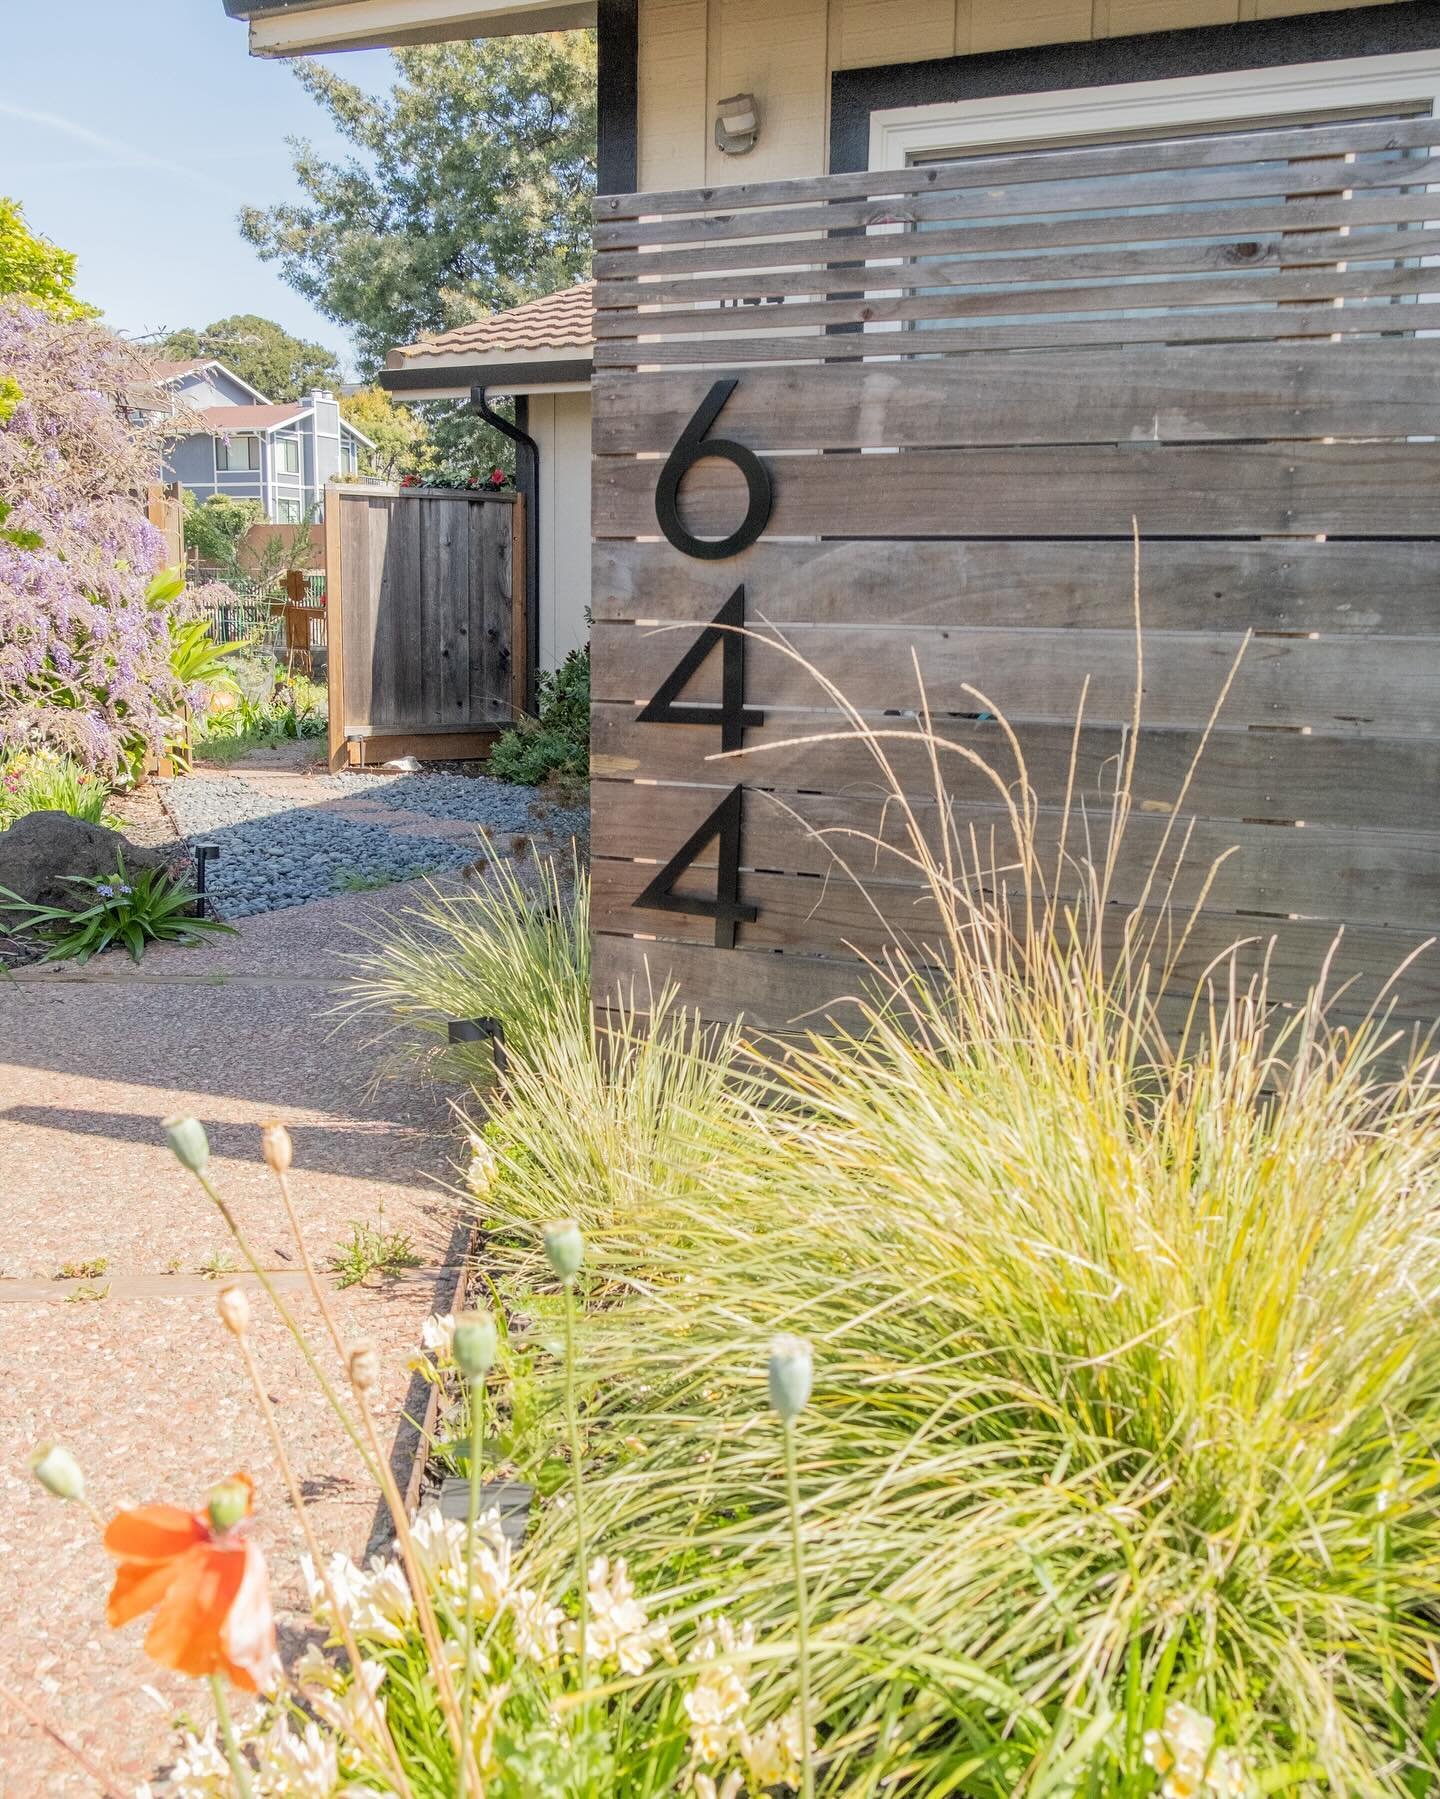 Swipe to explore the charming beauty of one of our favourites landscaping projects 🌿 

#landscaping #landscapeberkeley #landscapecontractor #landscapelovers #landscapingberkeley #berkeleygardens #alamedacalifornia